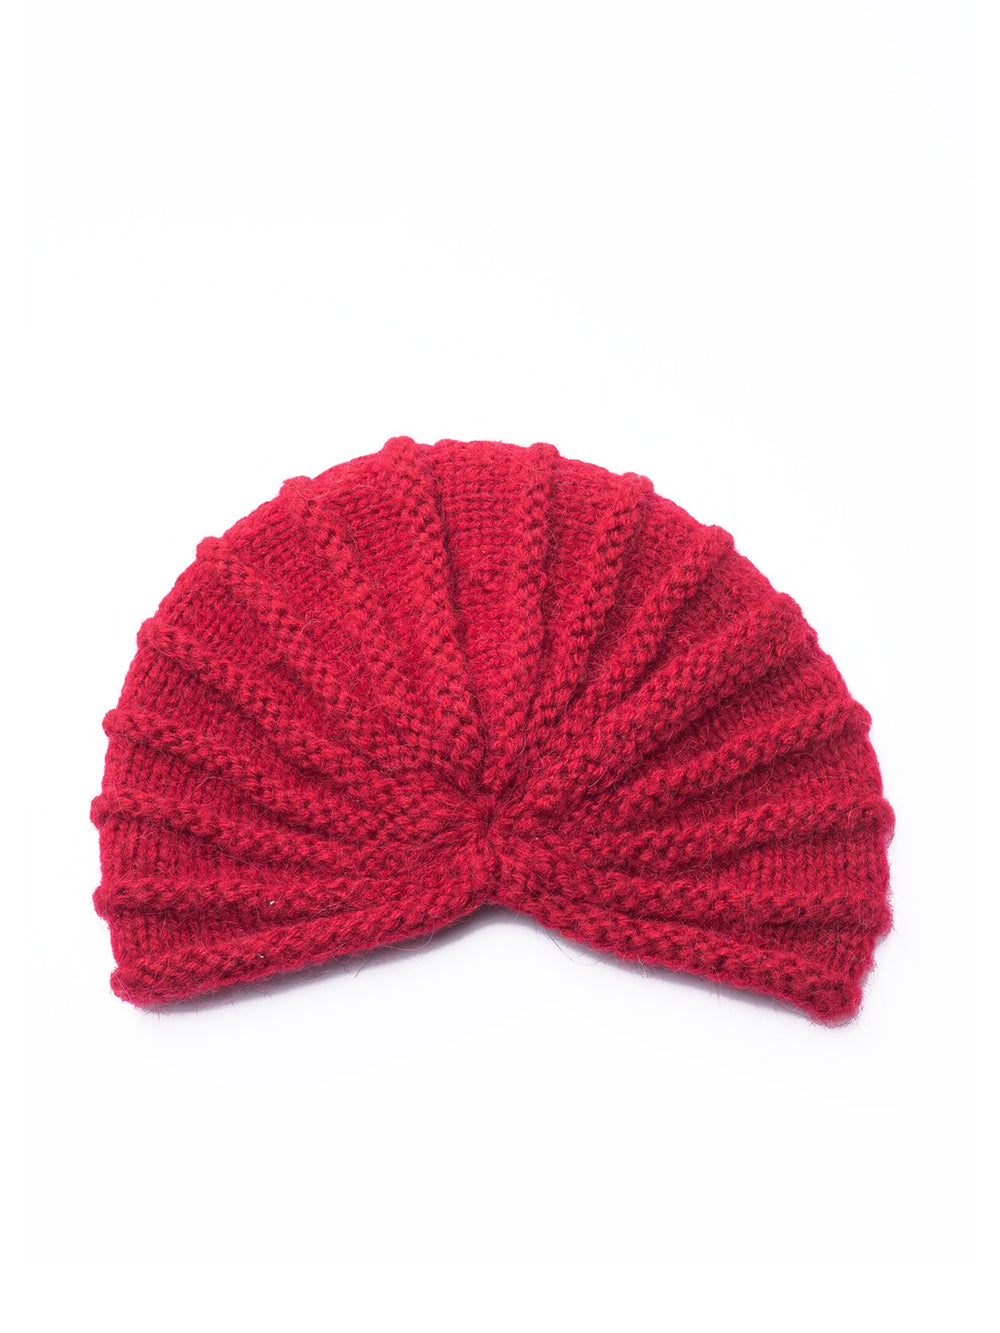 Knitted wool turban - red front view